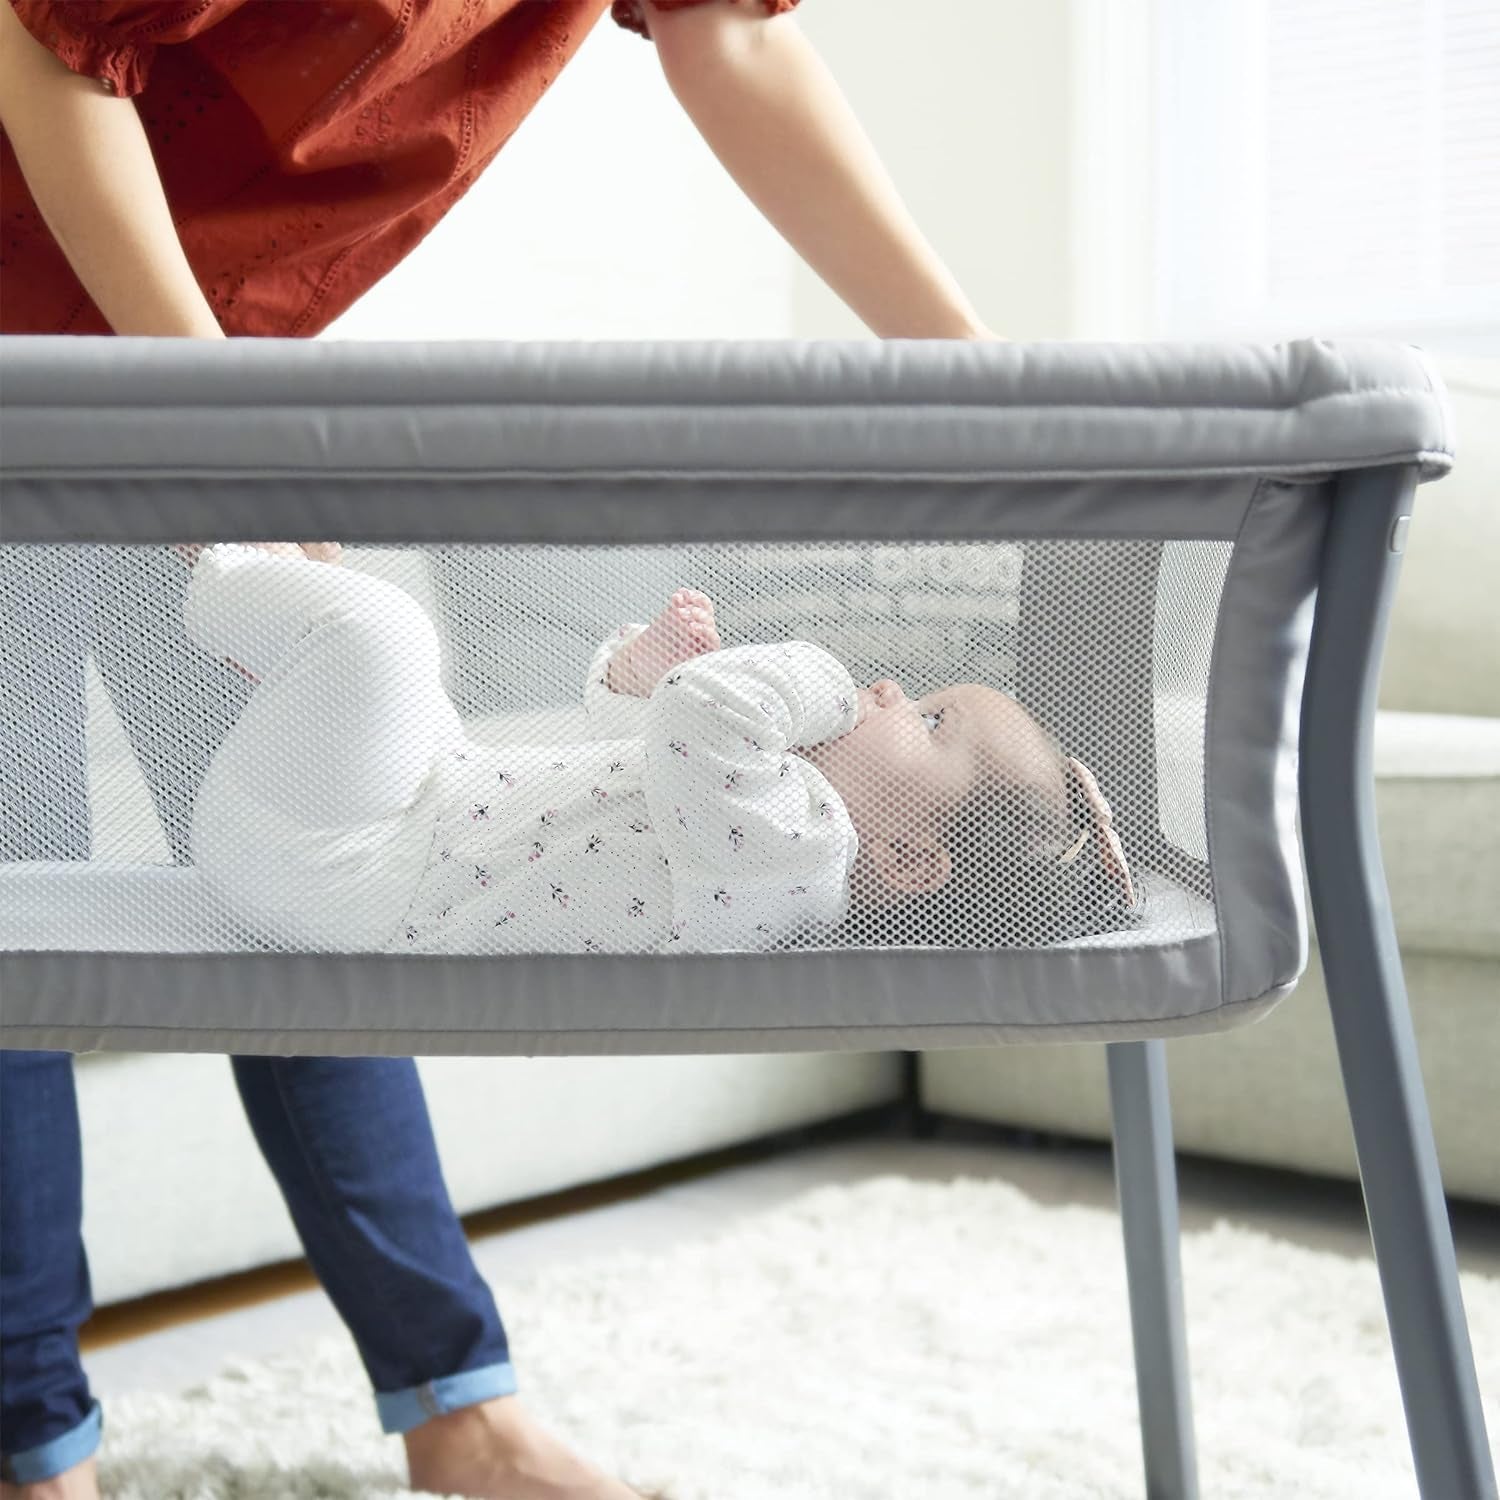 Lullago® Anywhere Portable Bassinet, Lightweight, Space-Saving Baby Bassinet with Waterproof Mattress and Fitted Sheet, Travel Bassinet for Baby Includes Carry Bag | Sandstone/Grey - Design By Technique